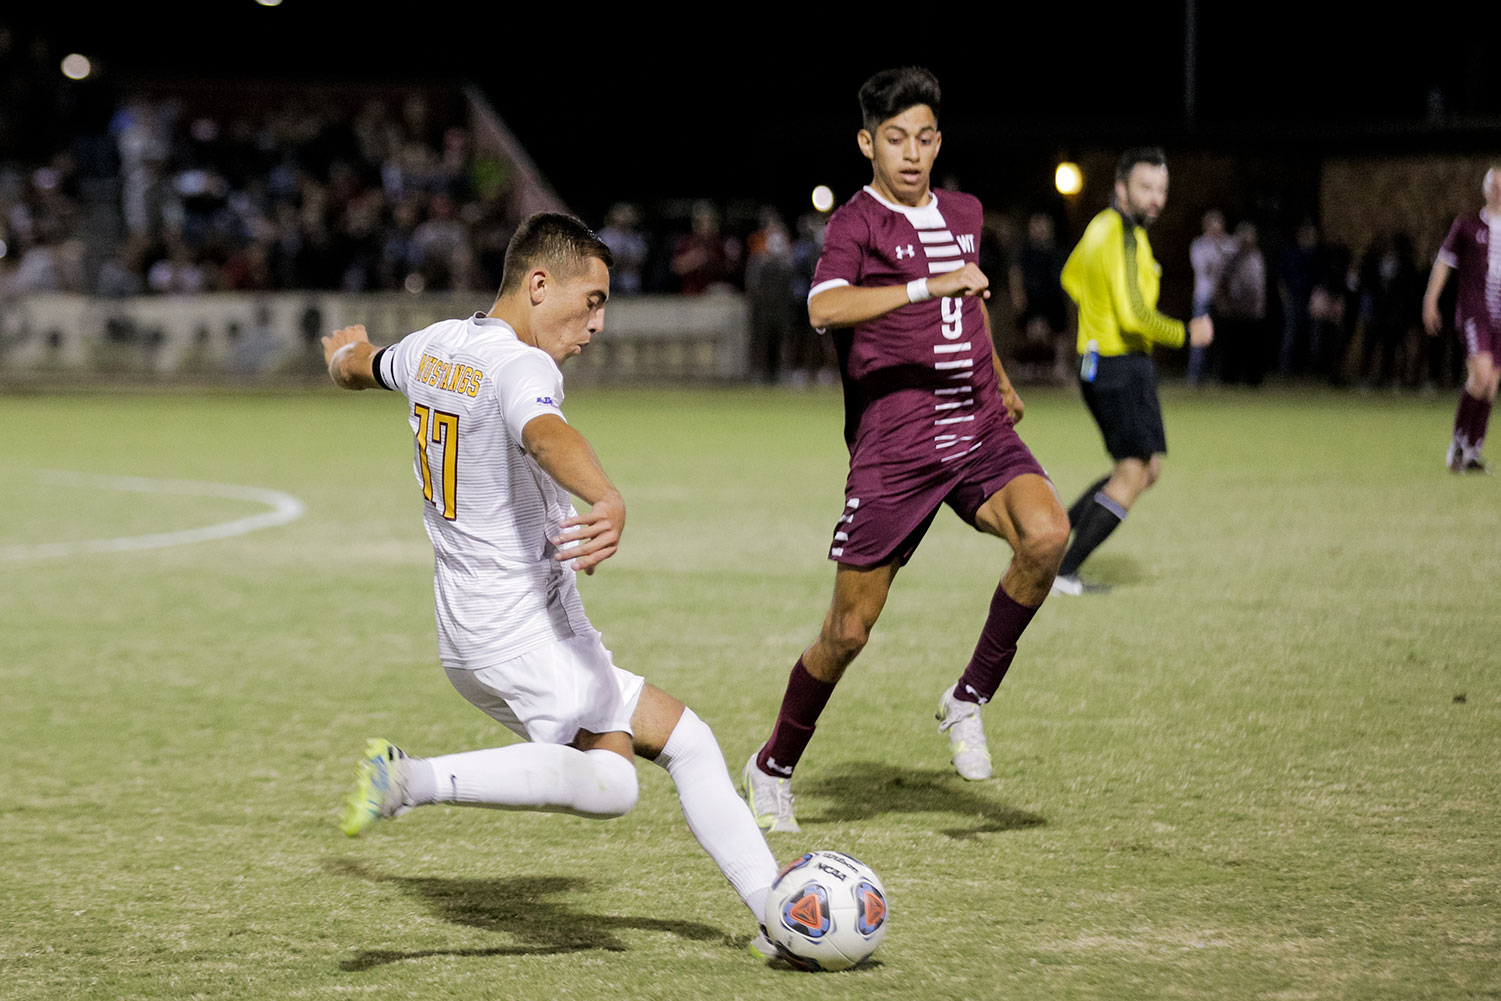 Kinesiology senior and midfielder Carlos Flores winds up for a kick to send the ball closer to West Texas A&M's goal in the second half